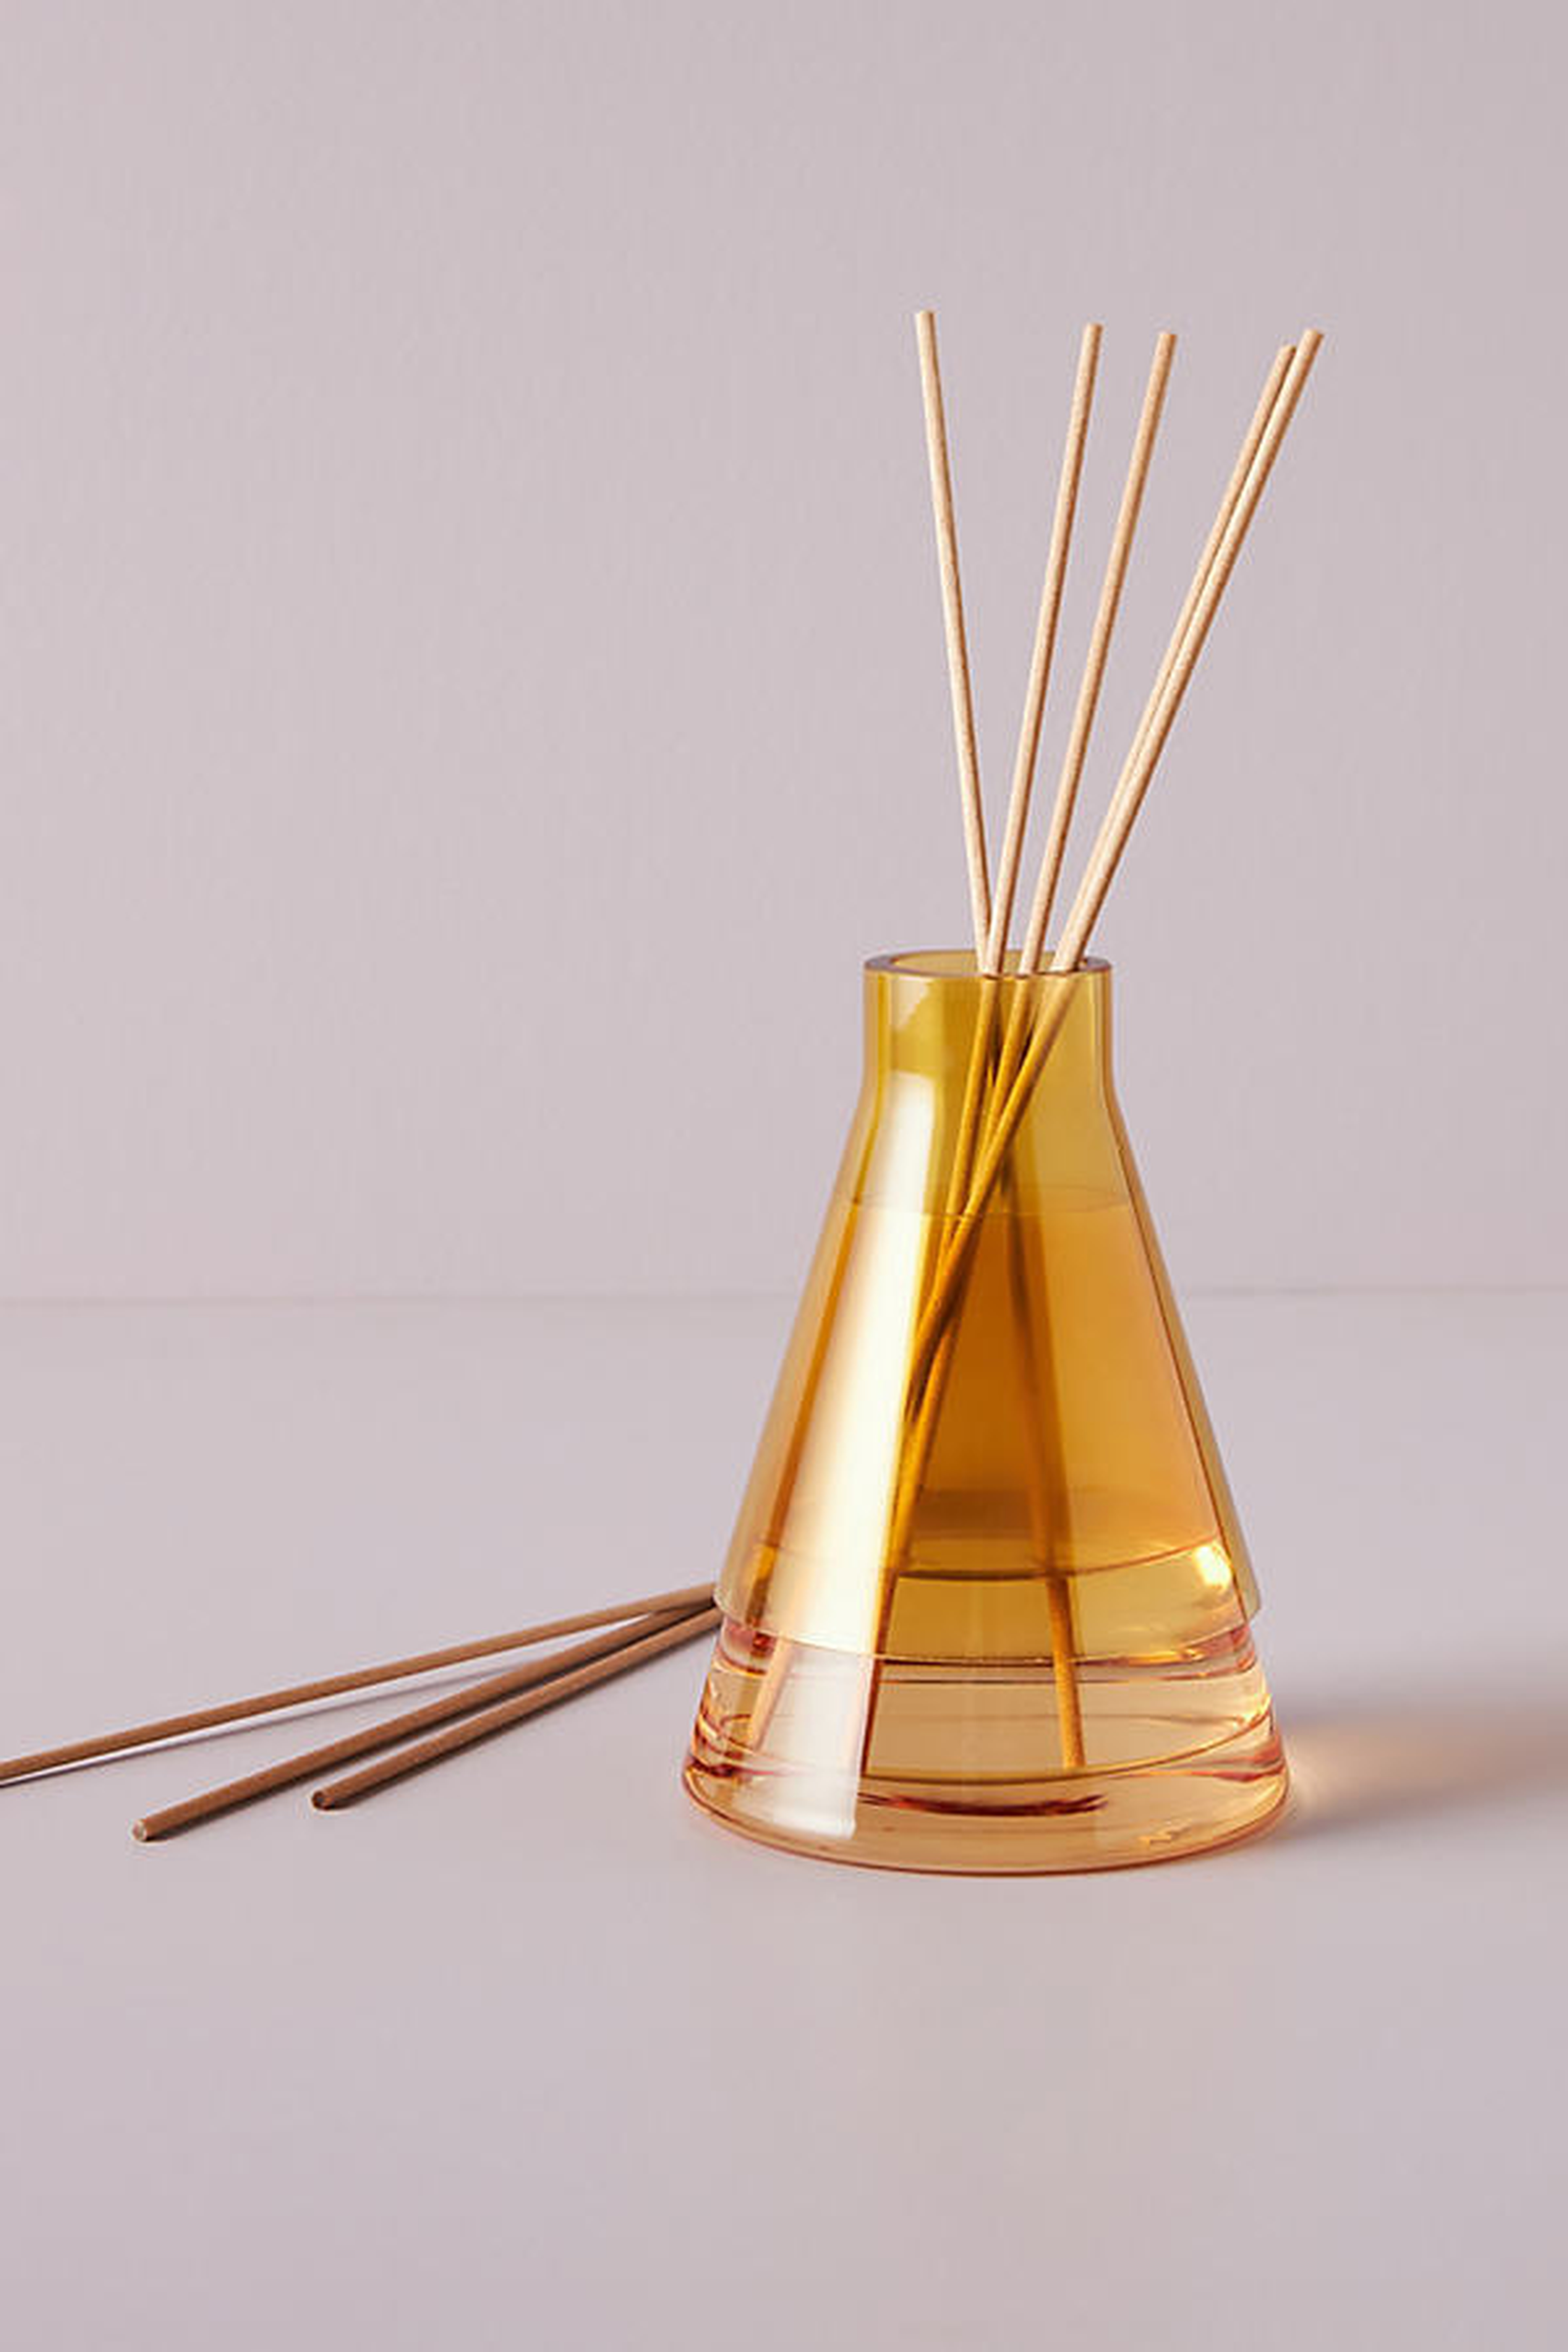 Illuminations Reed Diffuser By Anthropologie in Yellow - Anthropologie